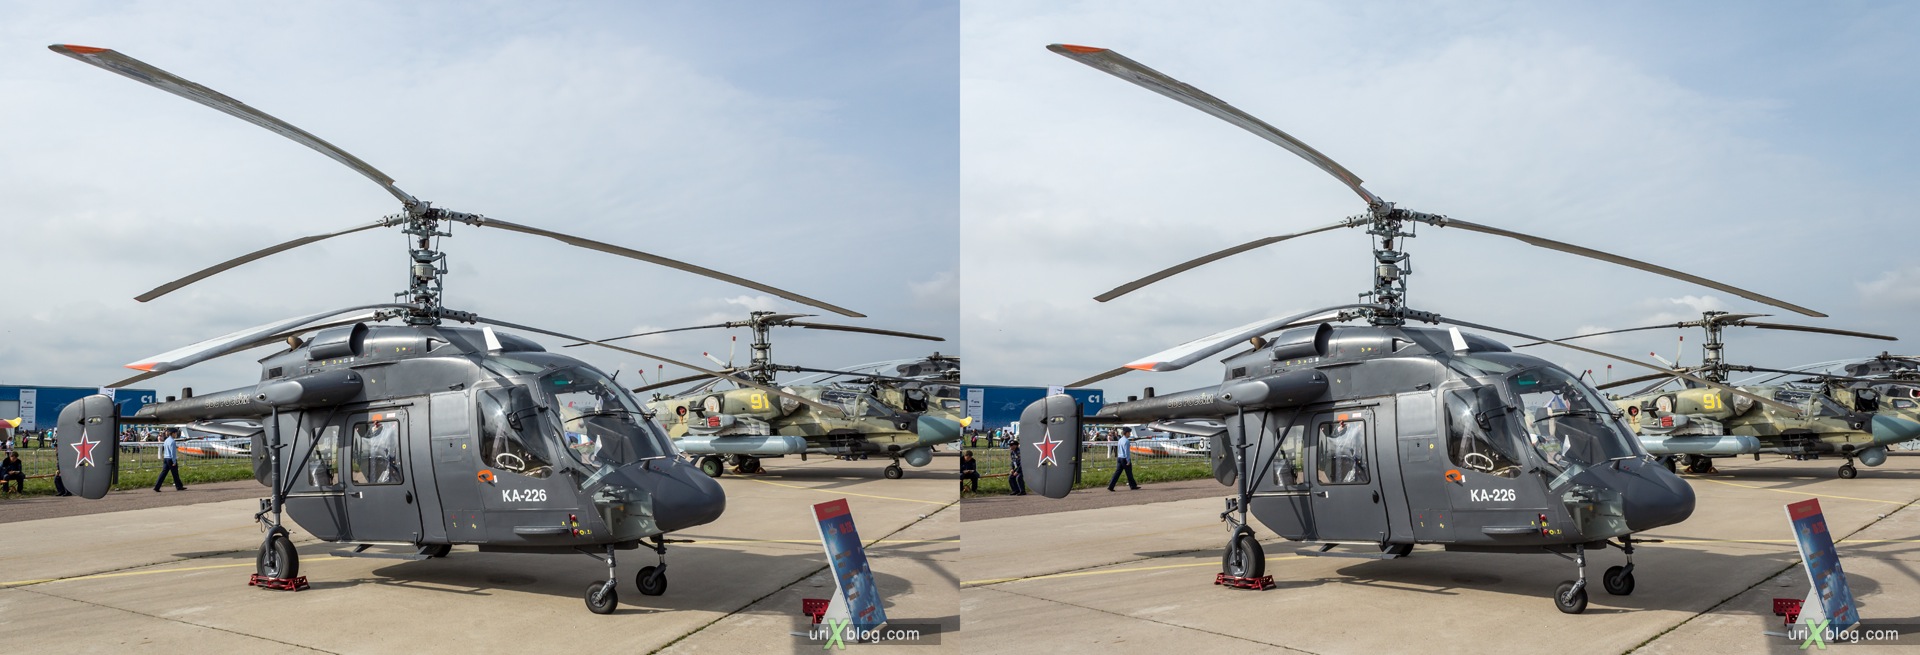 2013, MAKS, International Aviation and Space Salon, Russia, Ramenskoye airfield, Ка-226, helicopter, 3D, stereo pair, cross-eyed, crossview, cross view stereo pair, stereoscopic